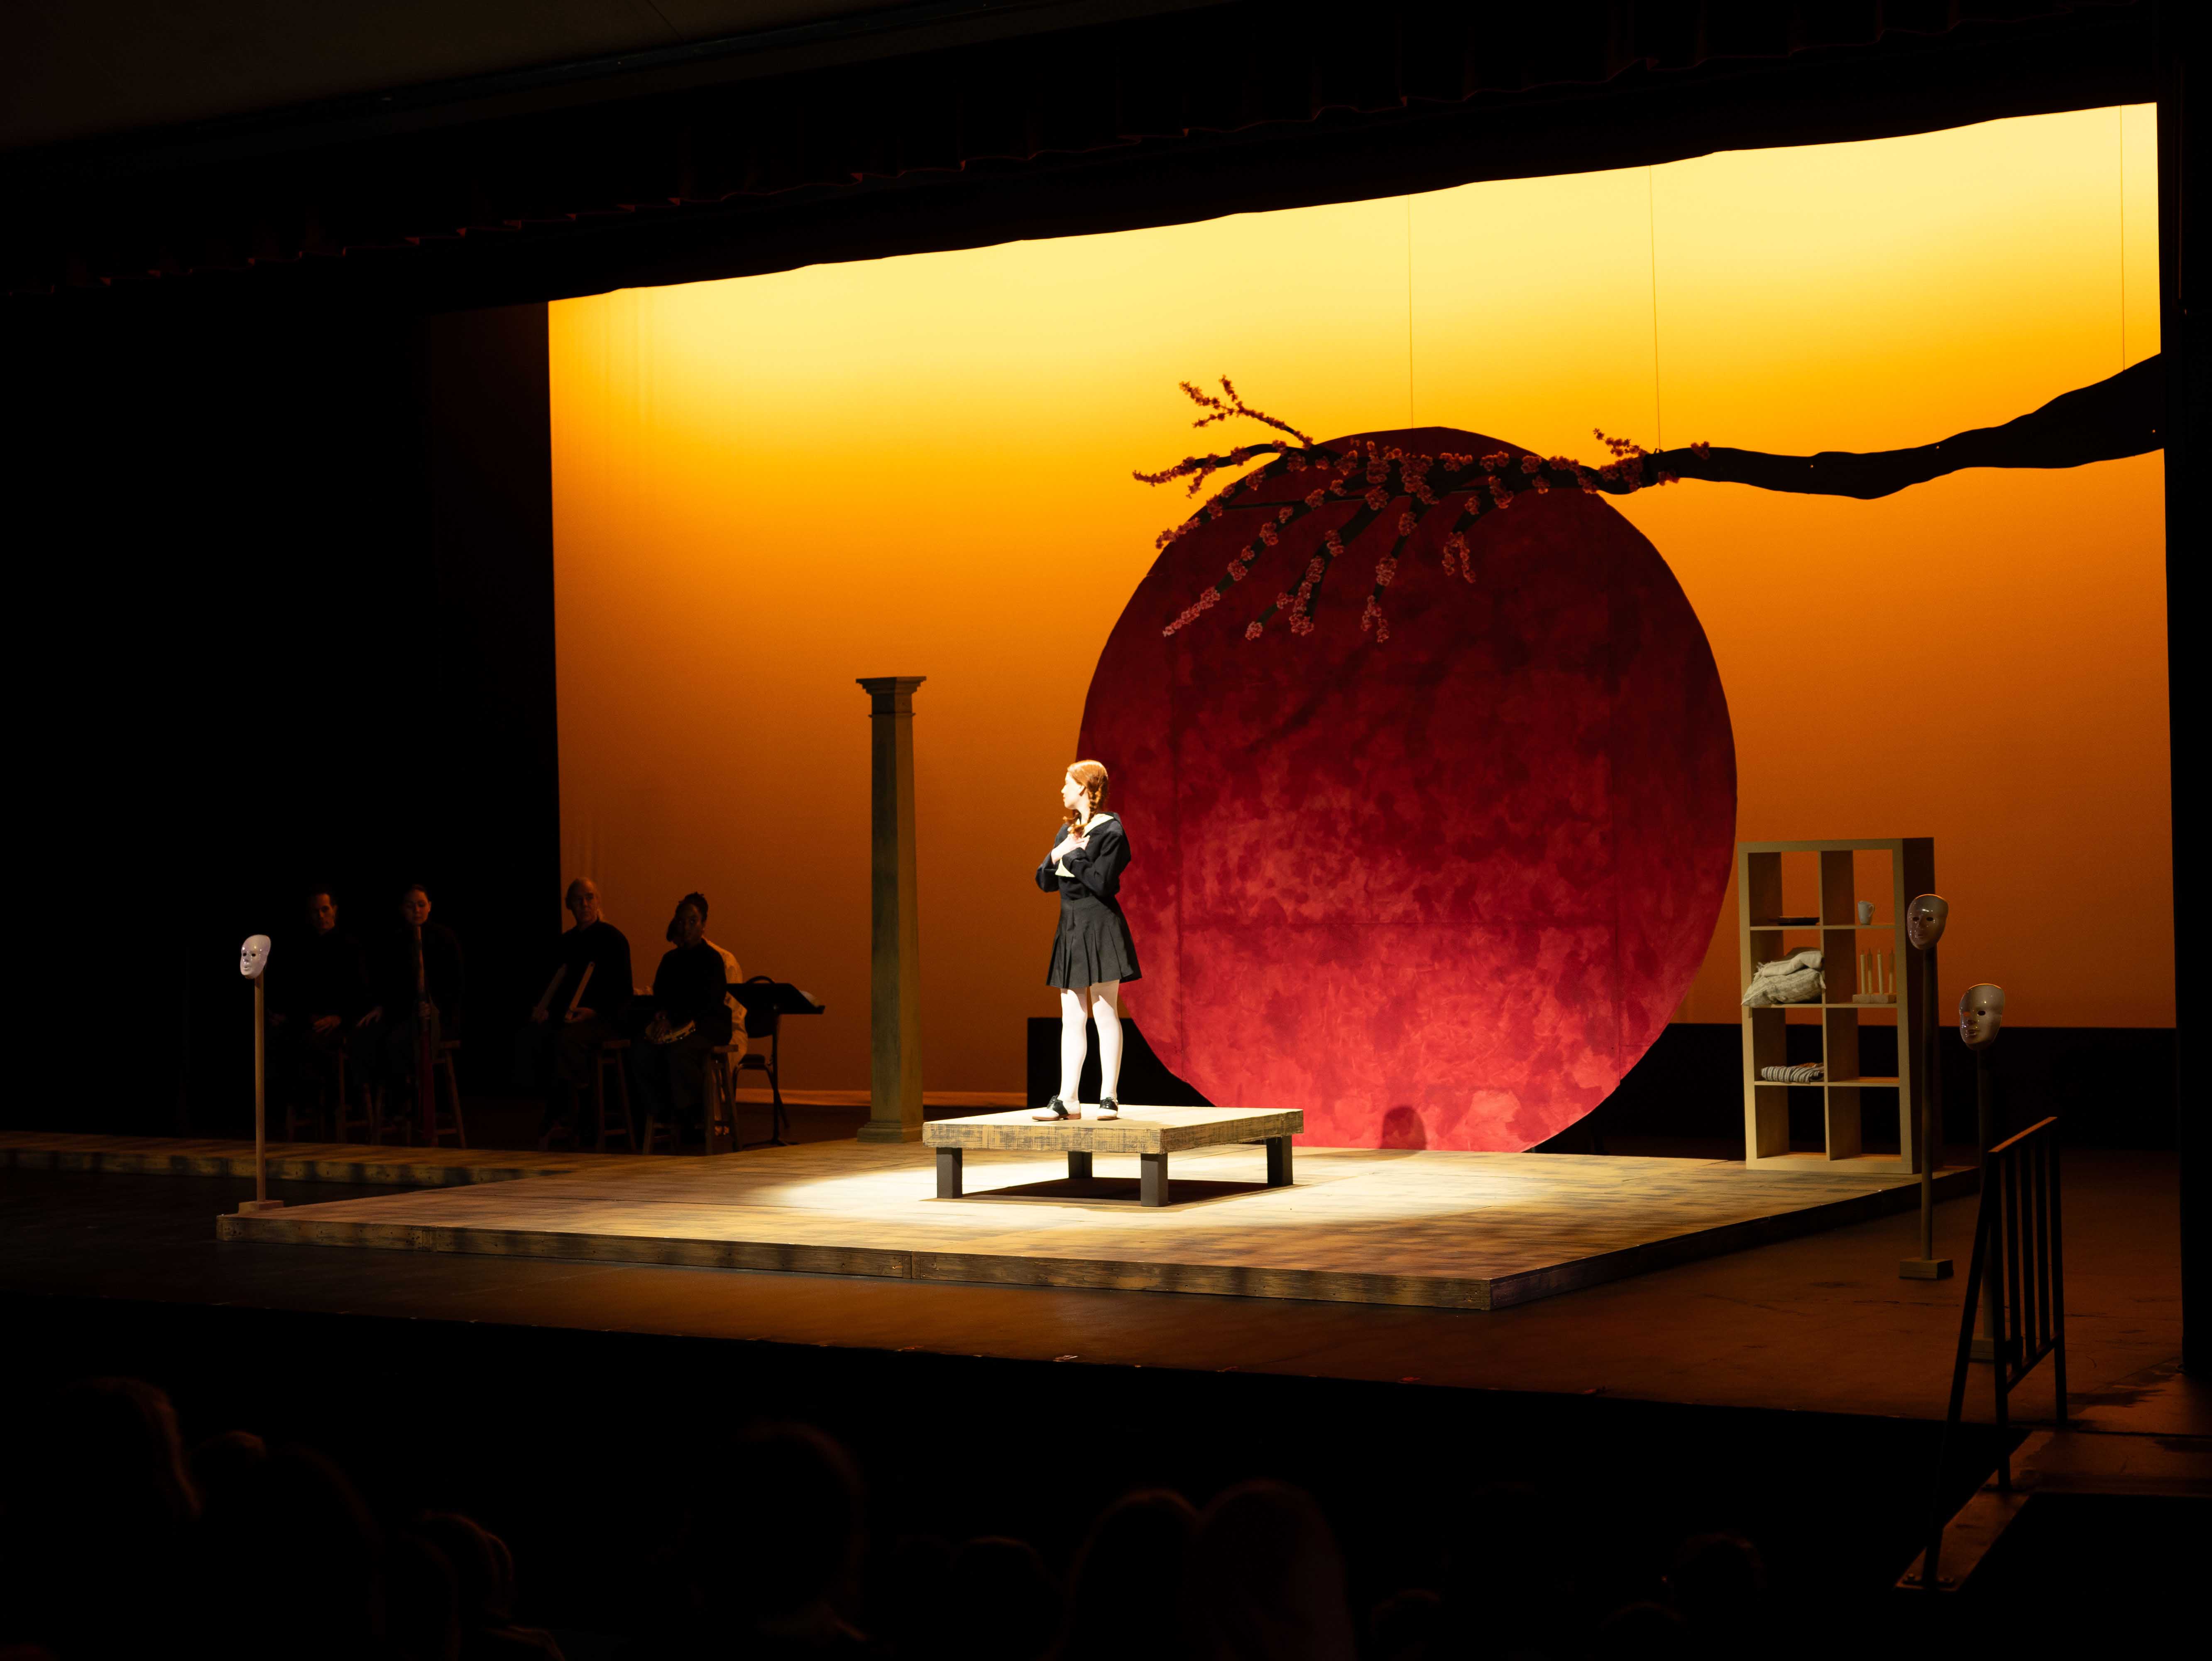 Person on stage before a large orb